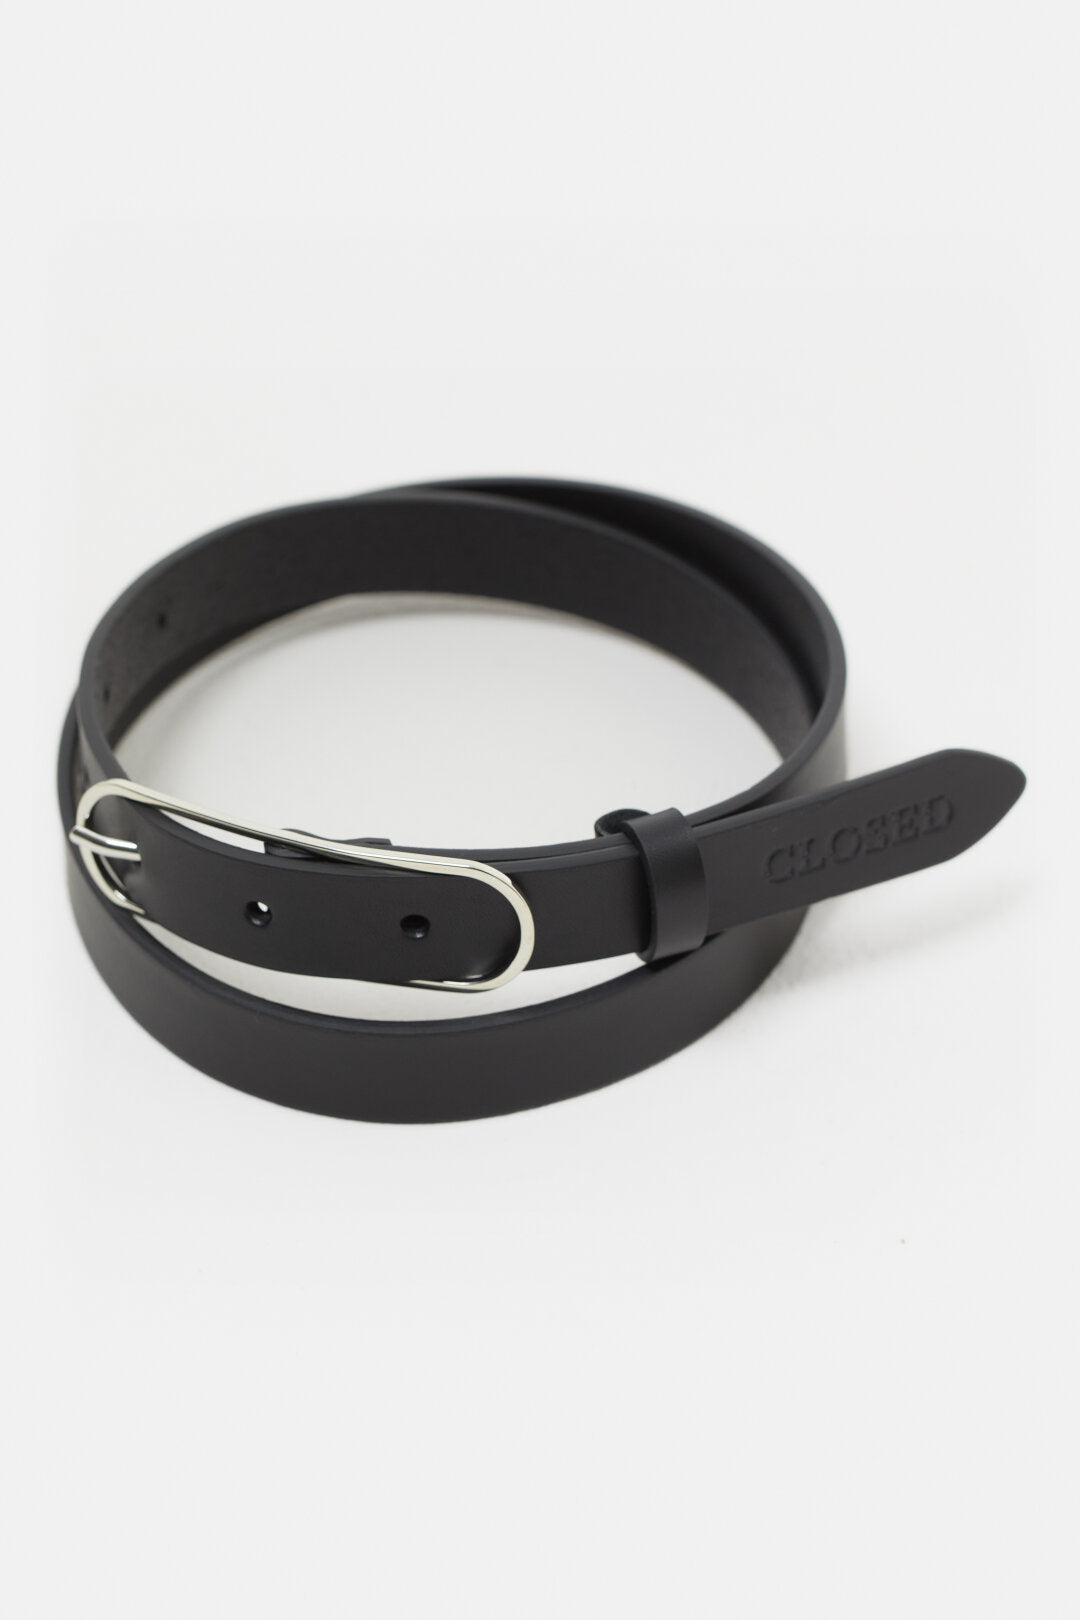 CLOSED WOMENS SLIM BELT WITH METAL BUCKLE- 2 COLORS